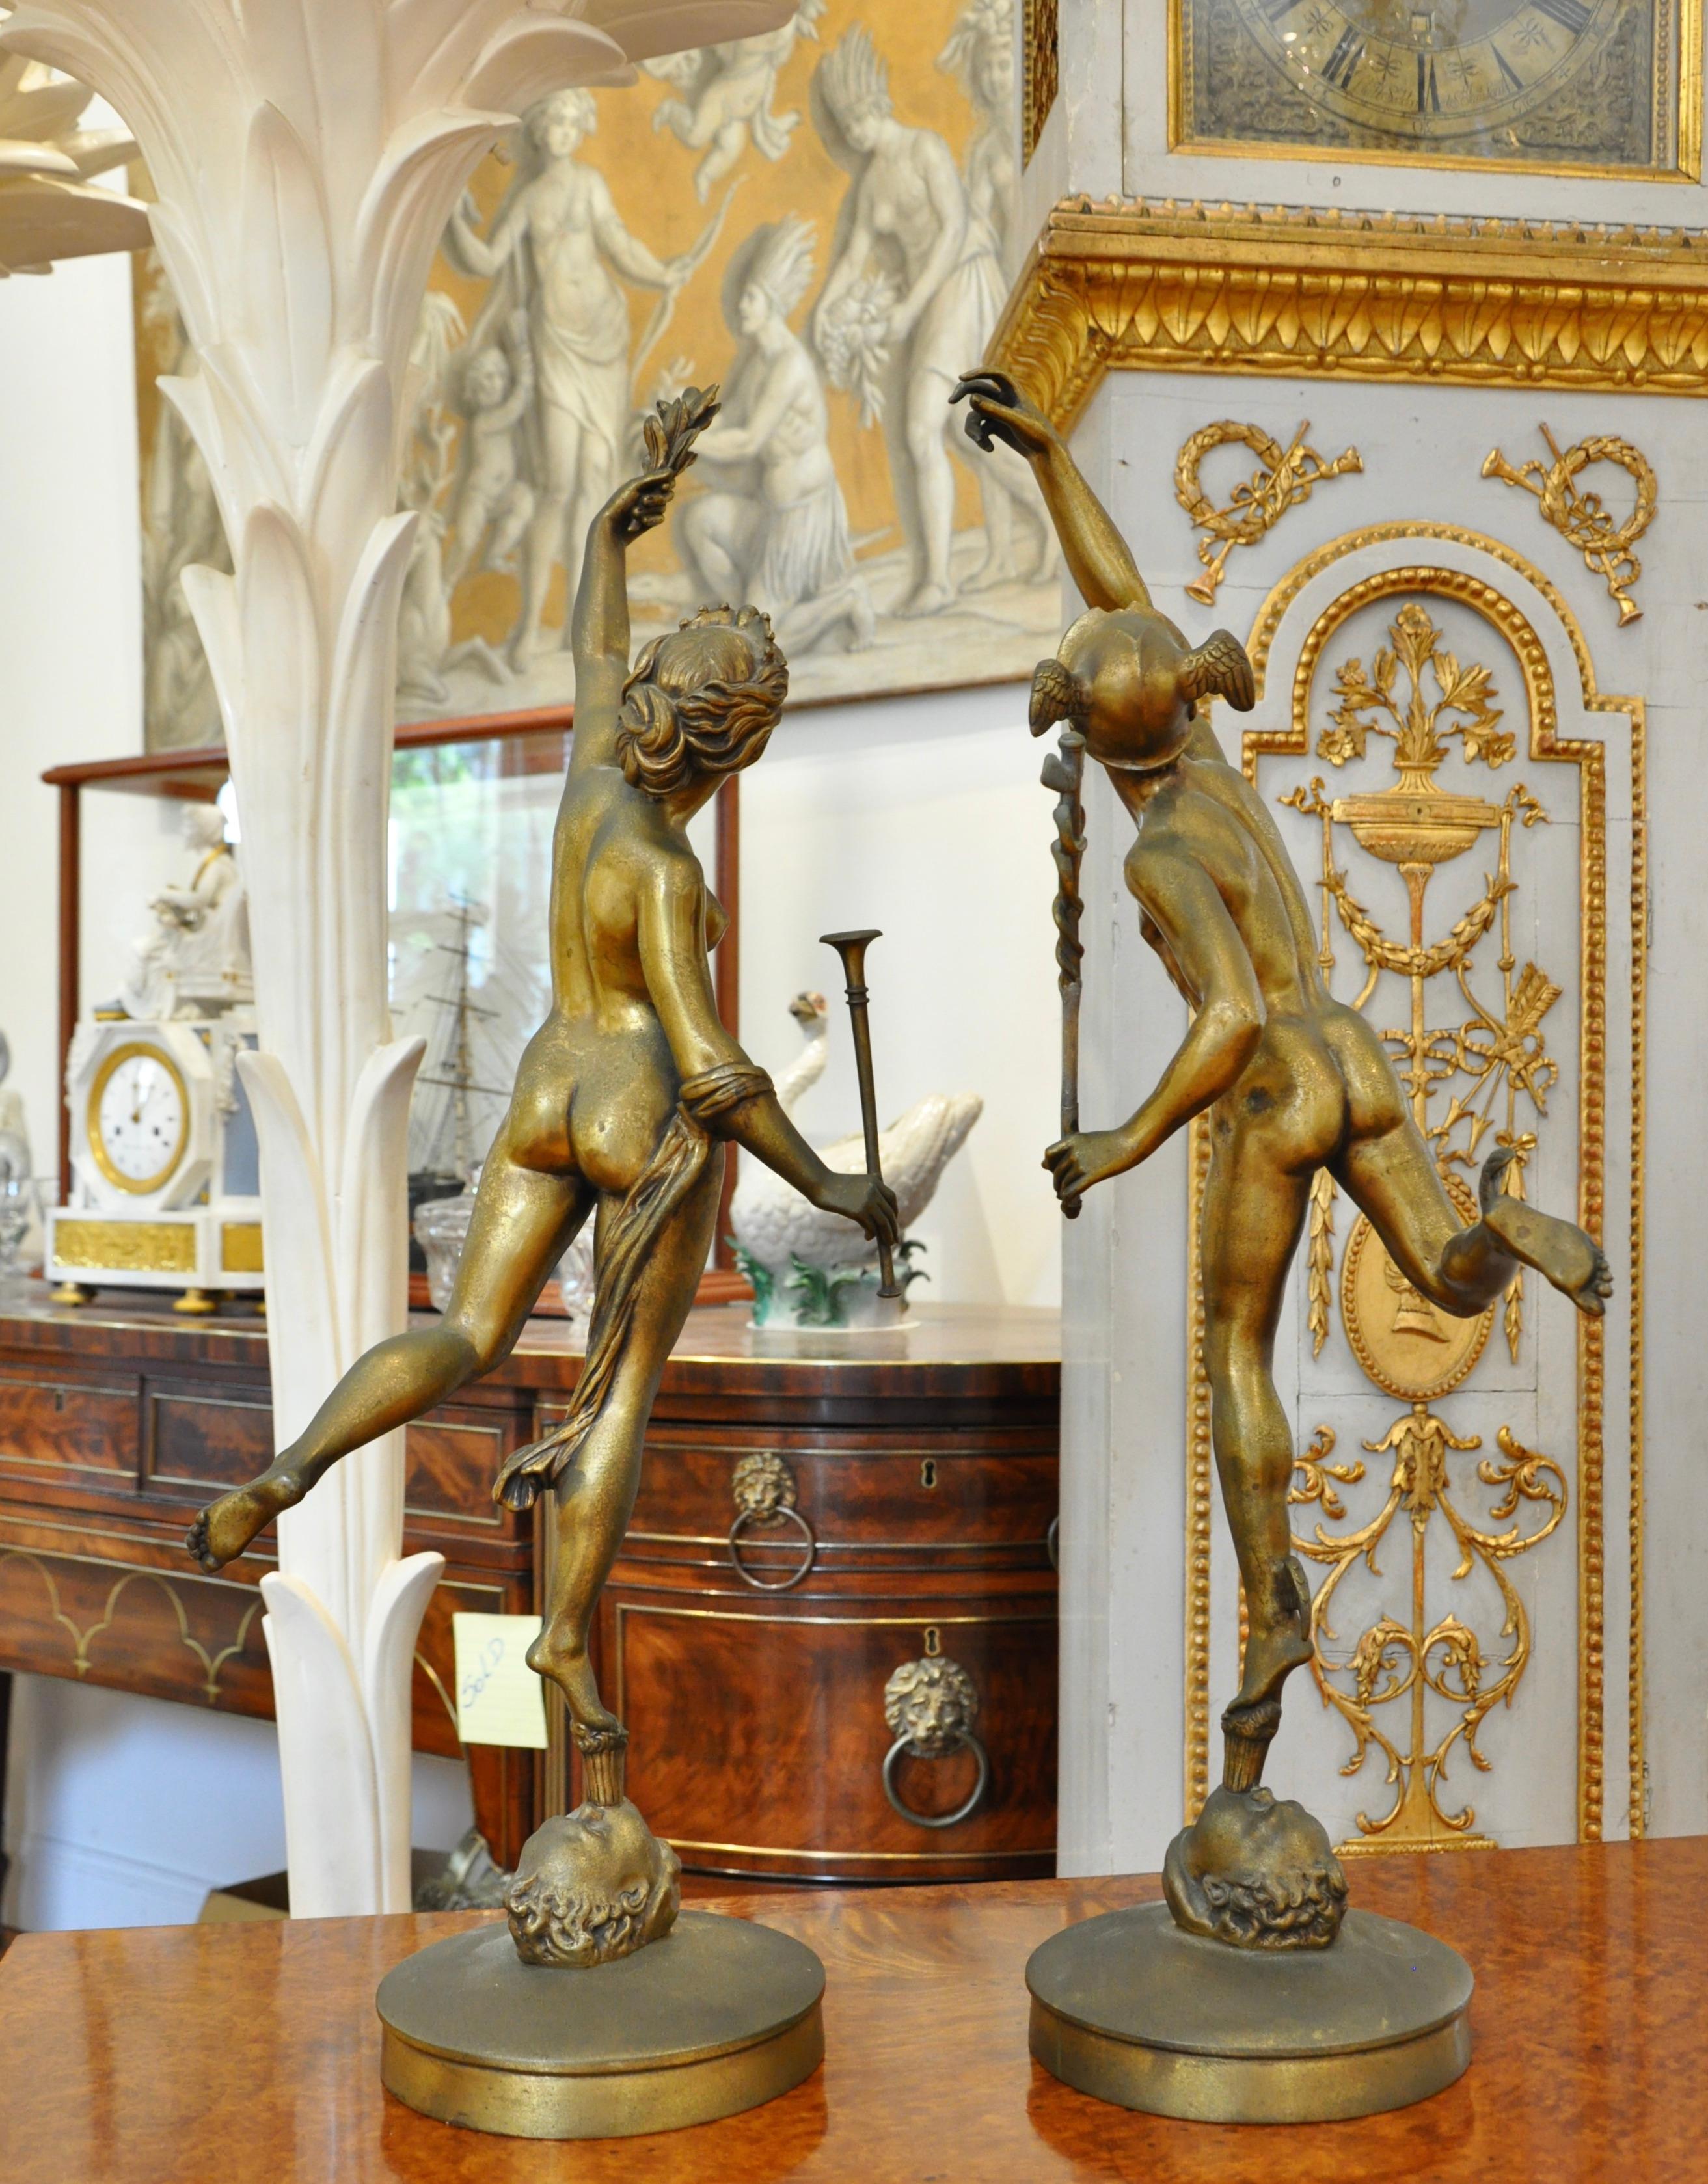 Pair of 19th century bronze statues of the God Mercury and the Goddess Fama. In Greek Mythology, Hermes and Pheme. Both classically posed, Fama with a trumpet and laurel and Mercury with Caduceus. 

We left the pair in patina, though could be